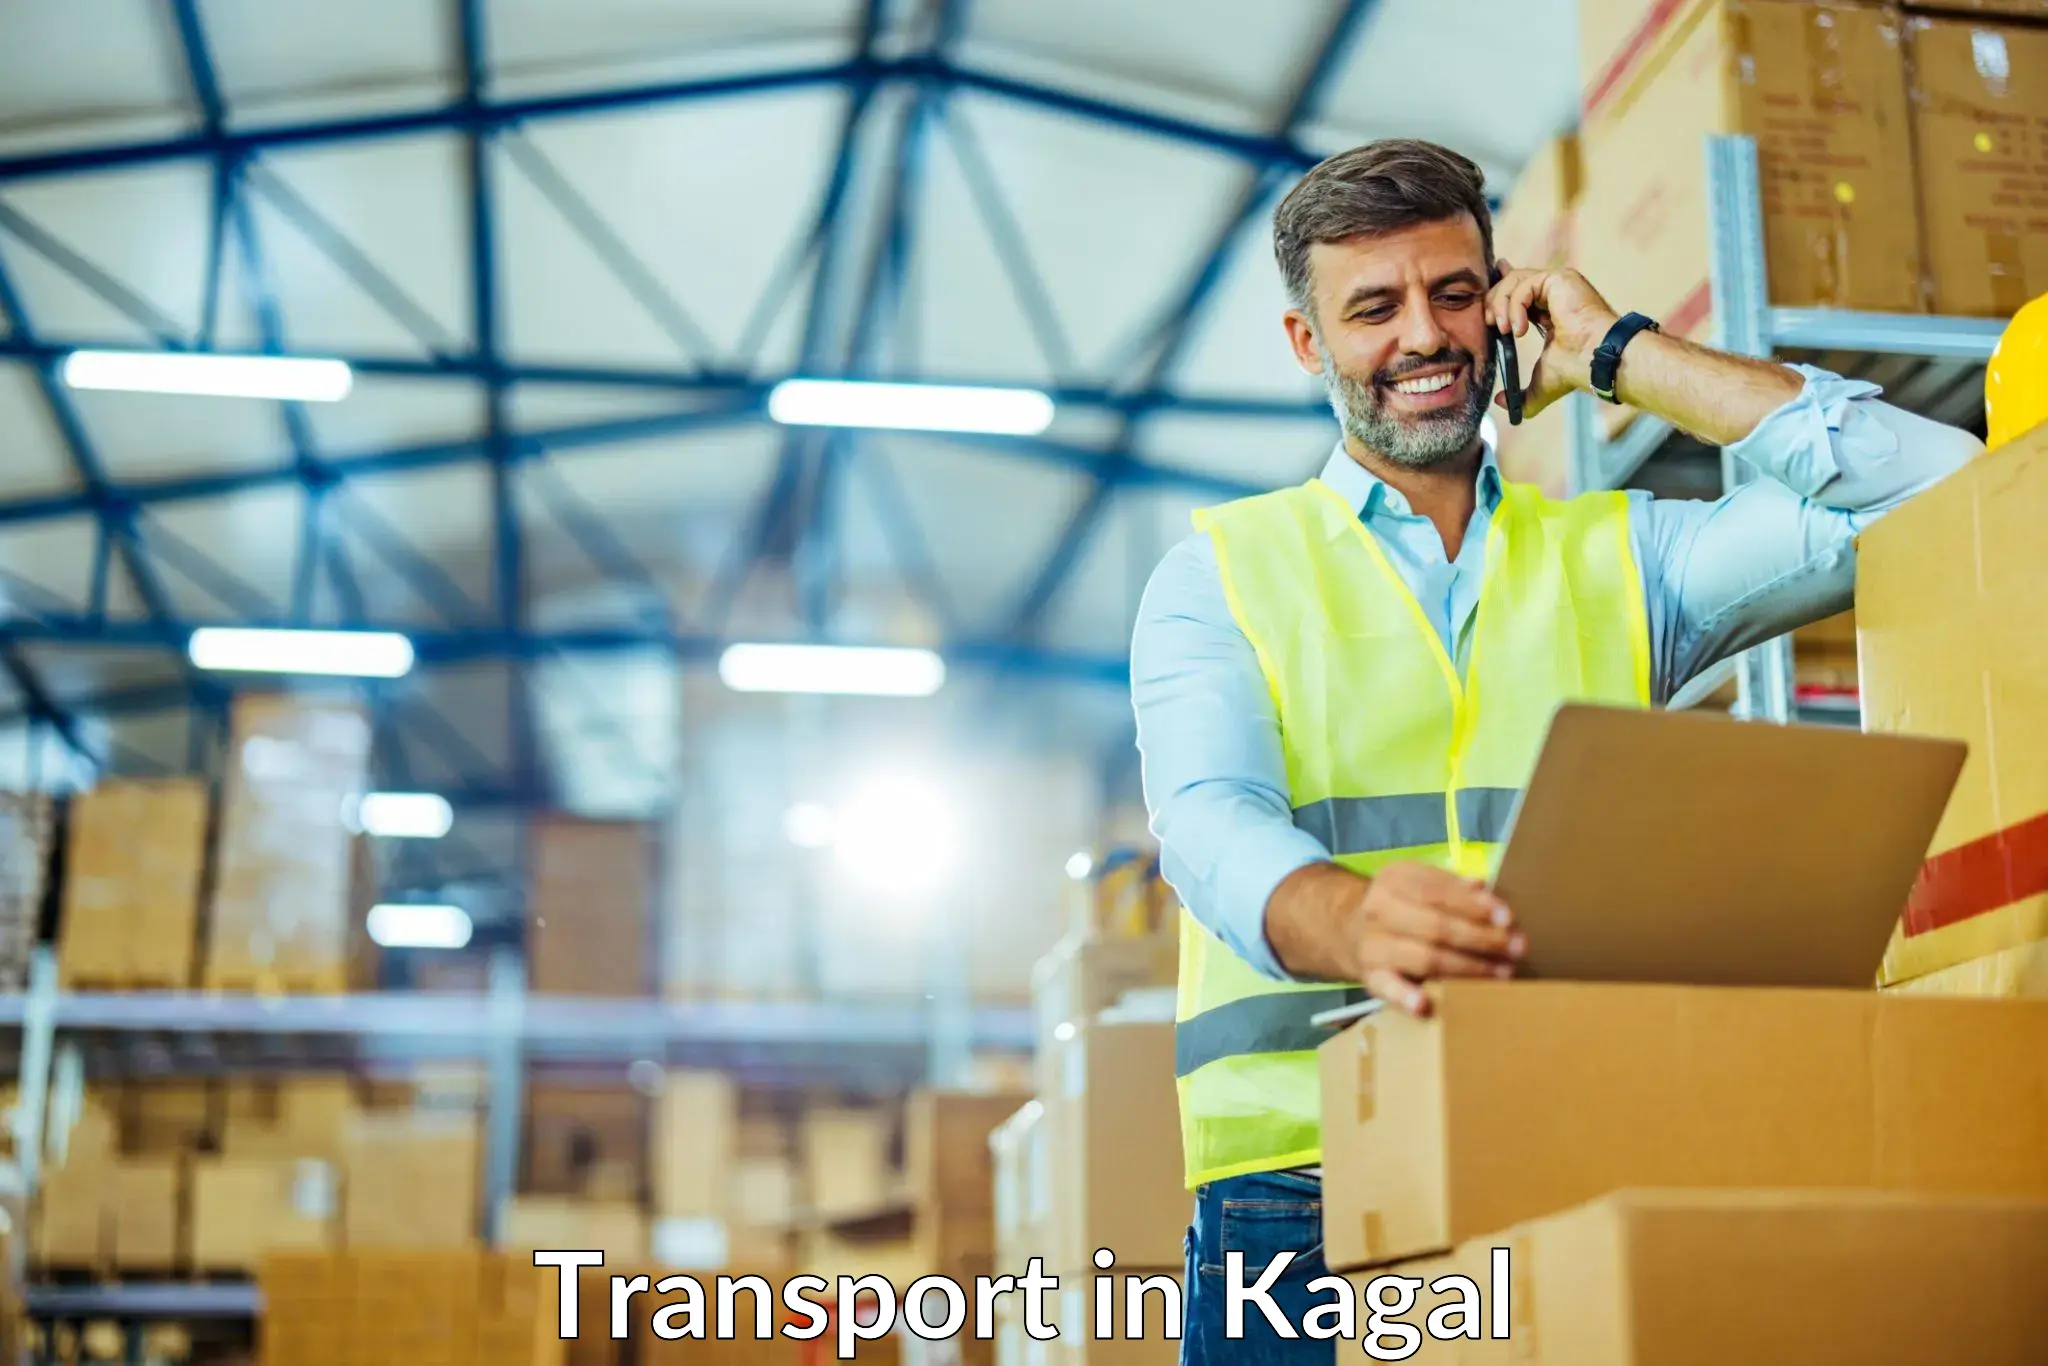 Pick up transport service in Kagal